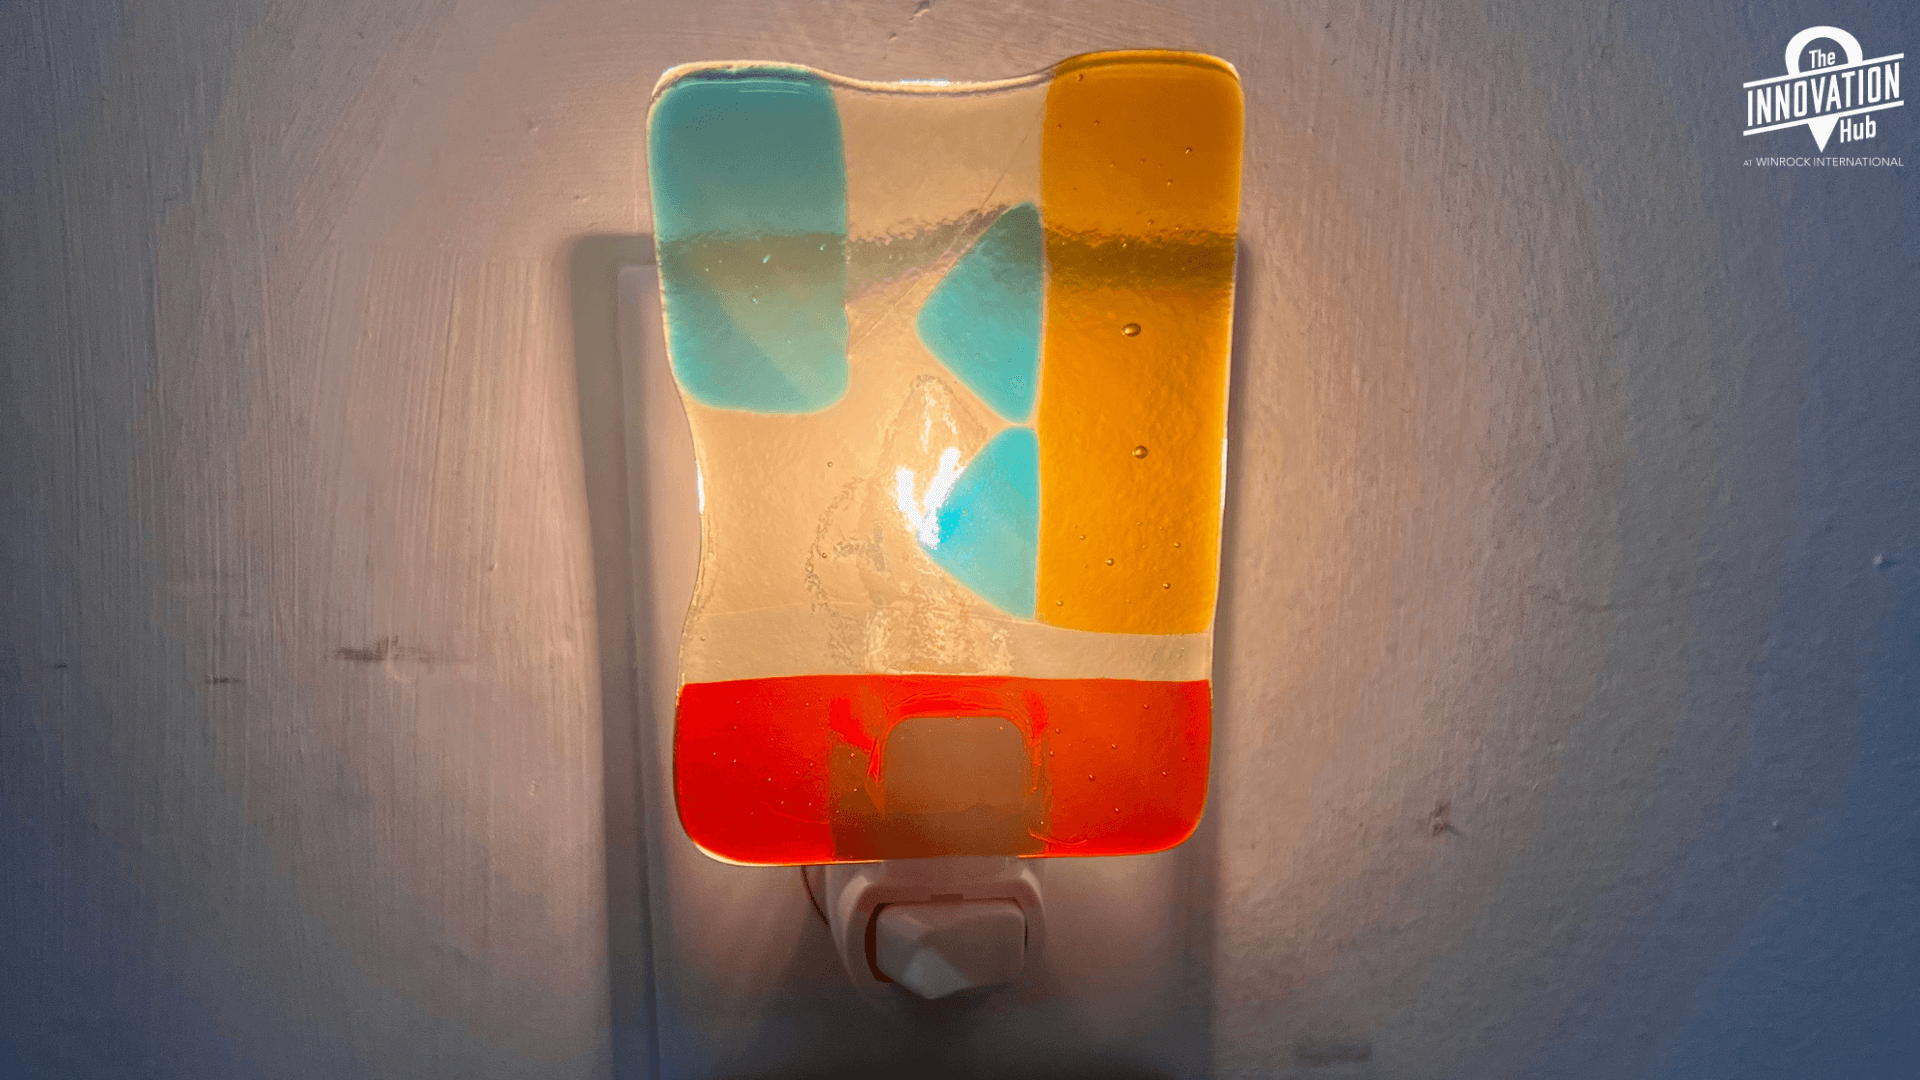 A color fused glass nightlight with teal, orange, red, and clear glass in a vertical rectangle shape. The night light is plugged in, so it illumiates beautifully.